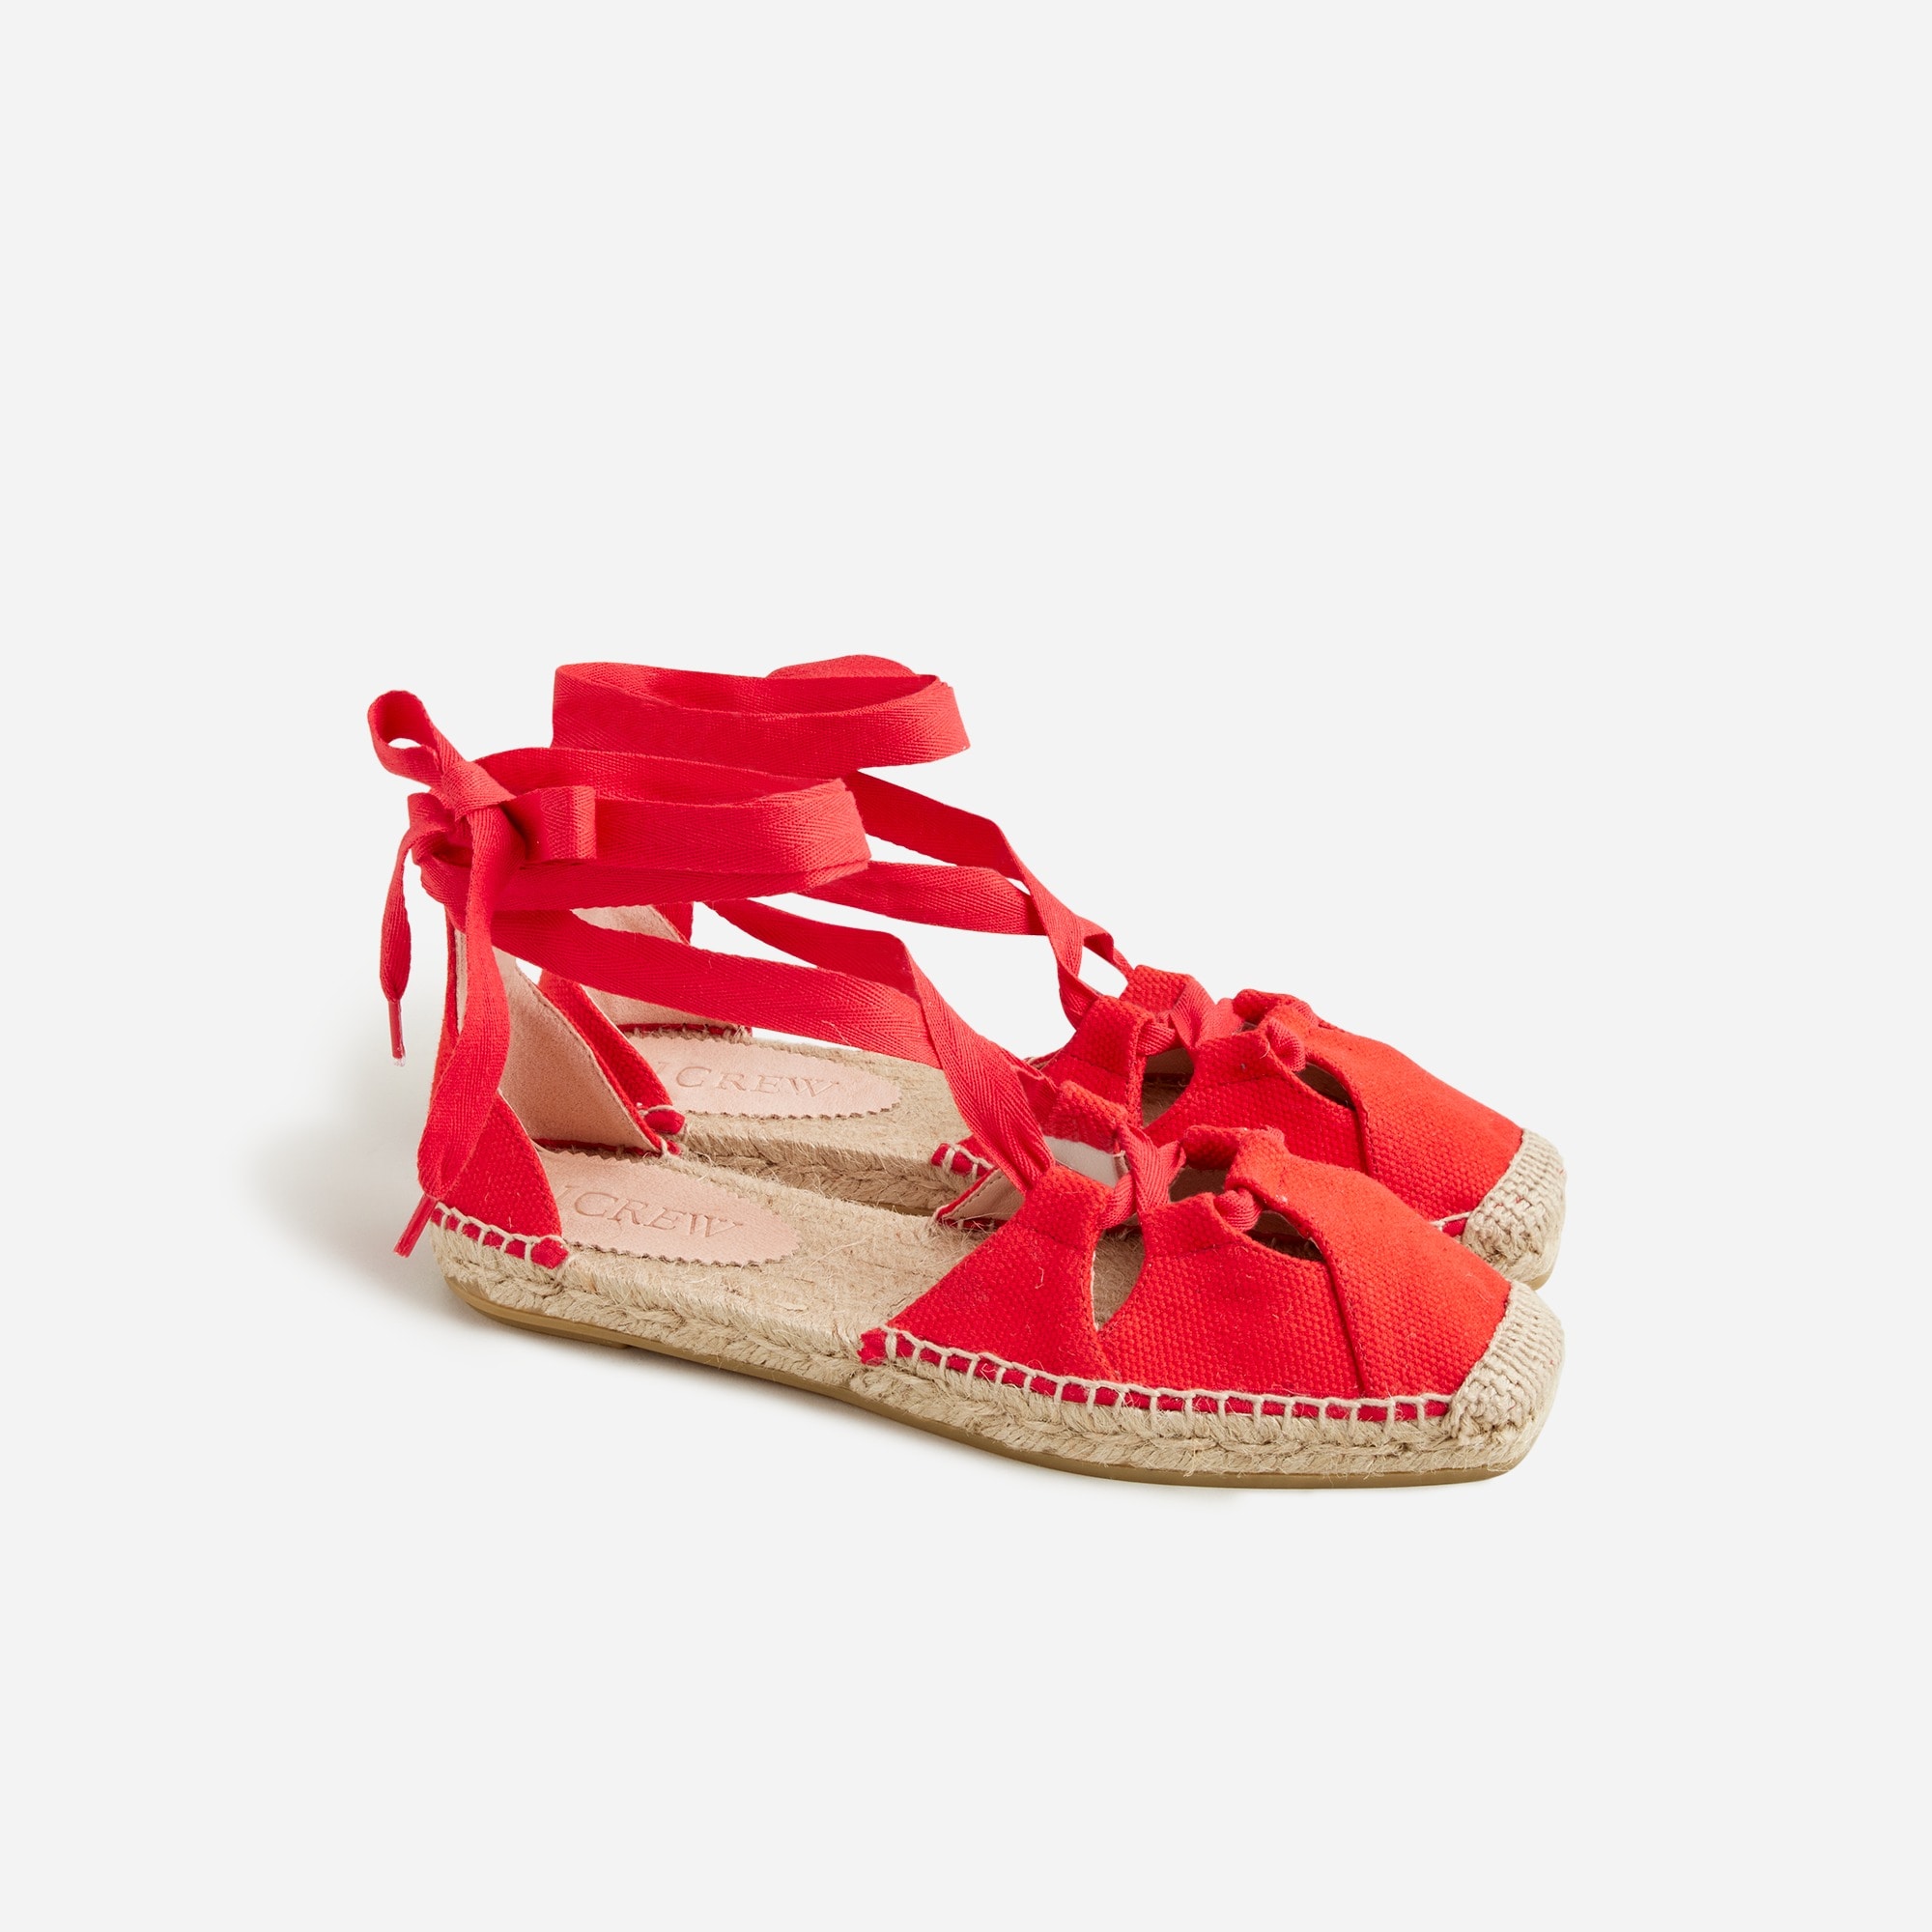 womens Made-in-Spain cutout lace-up espadrilles